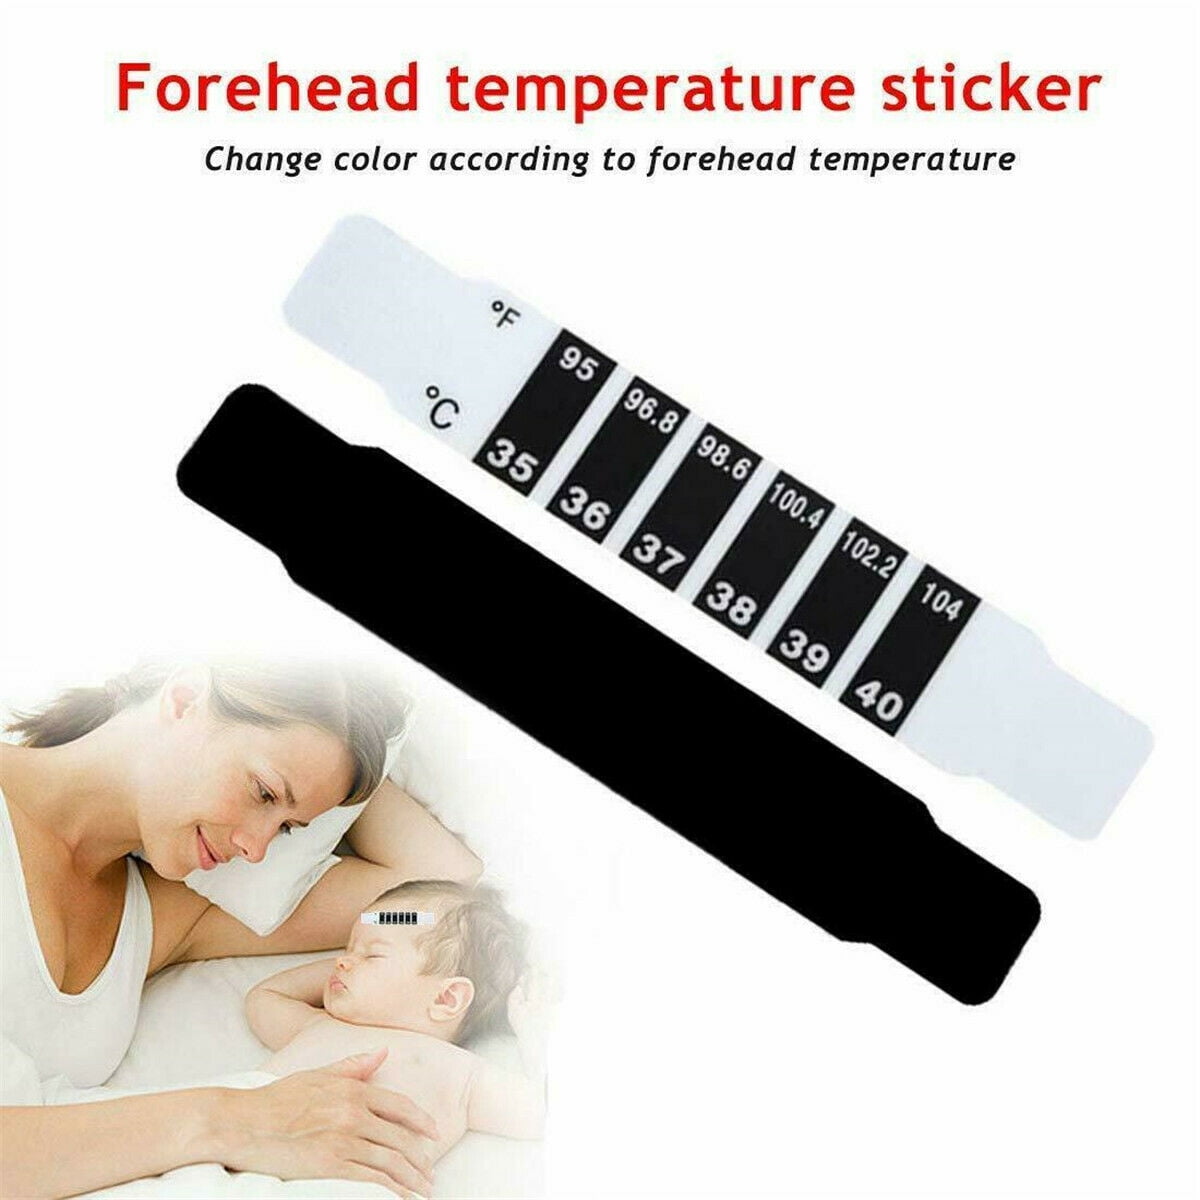 2x Safe Infant Kid Baby Forehead Strip Head Temperature Test Thermometer Sticker 